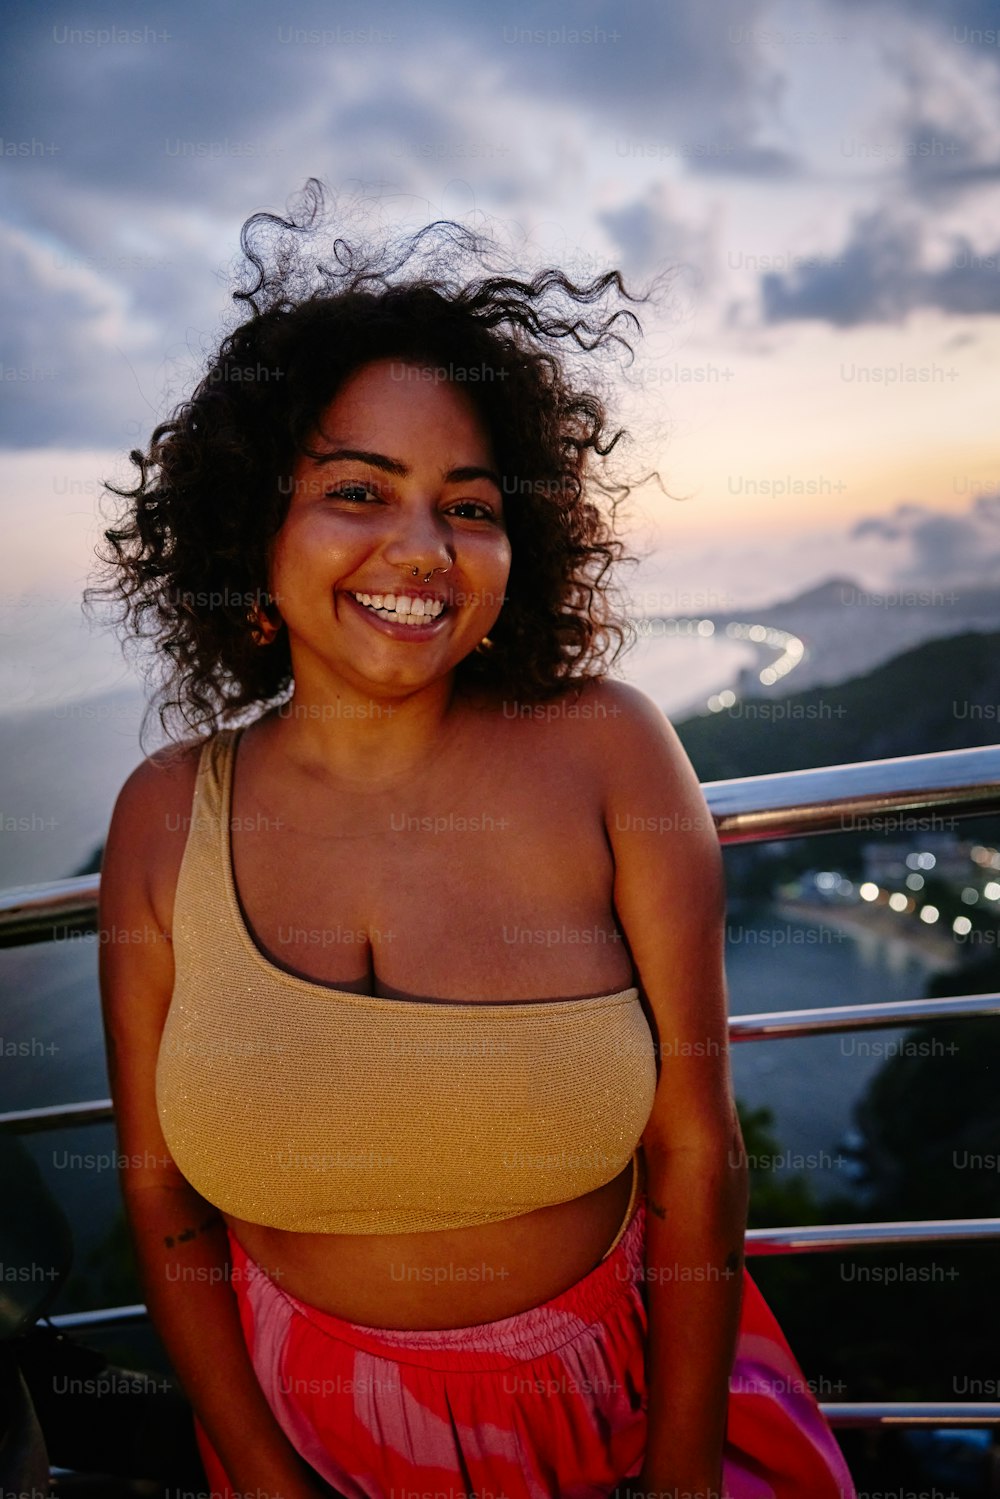 a woman in a bikini top smiling at the camera